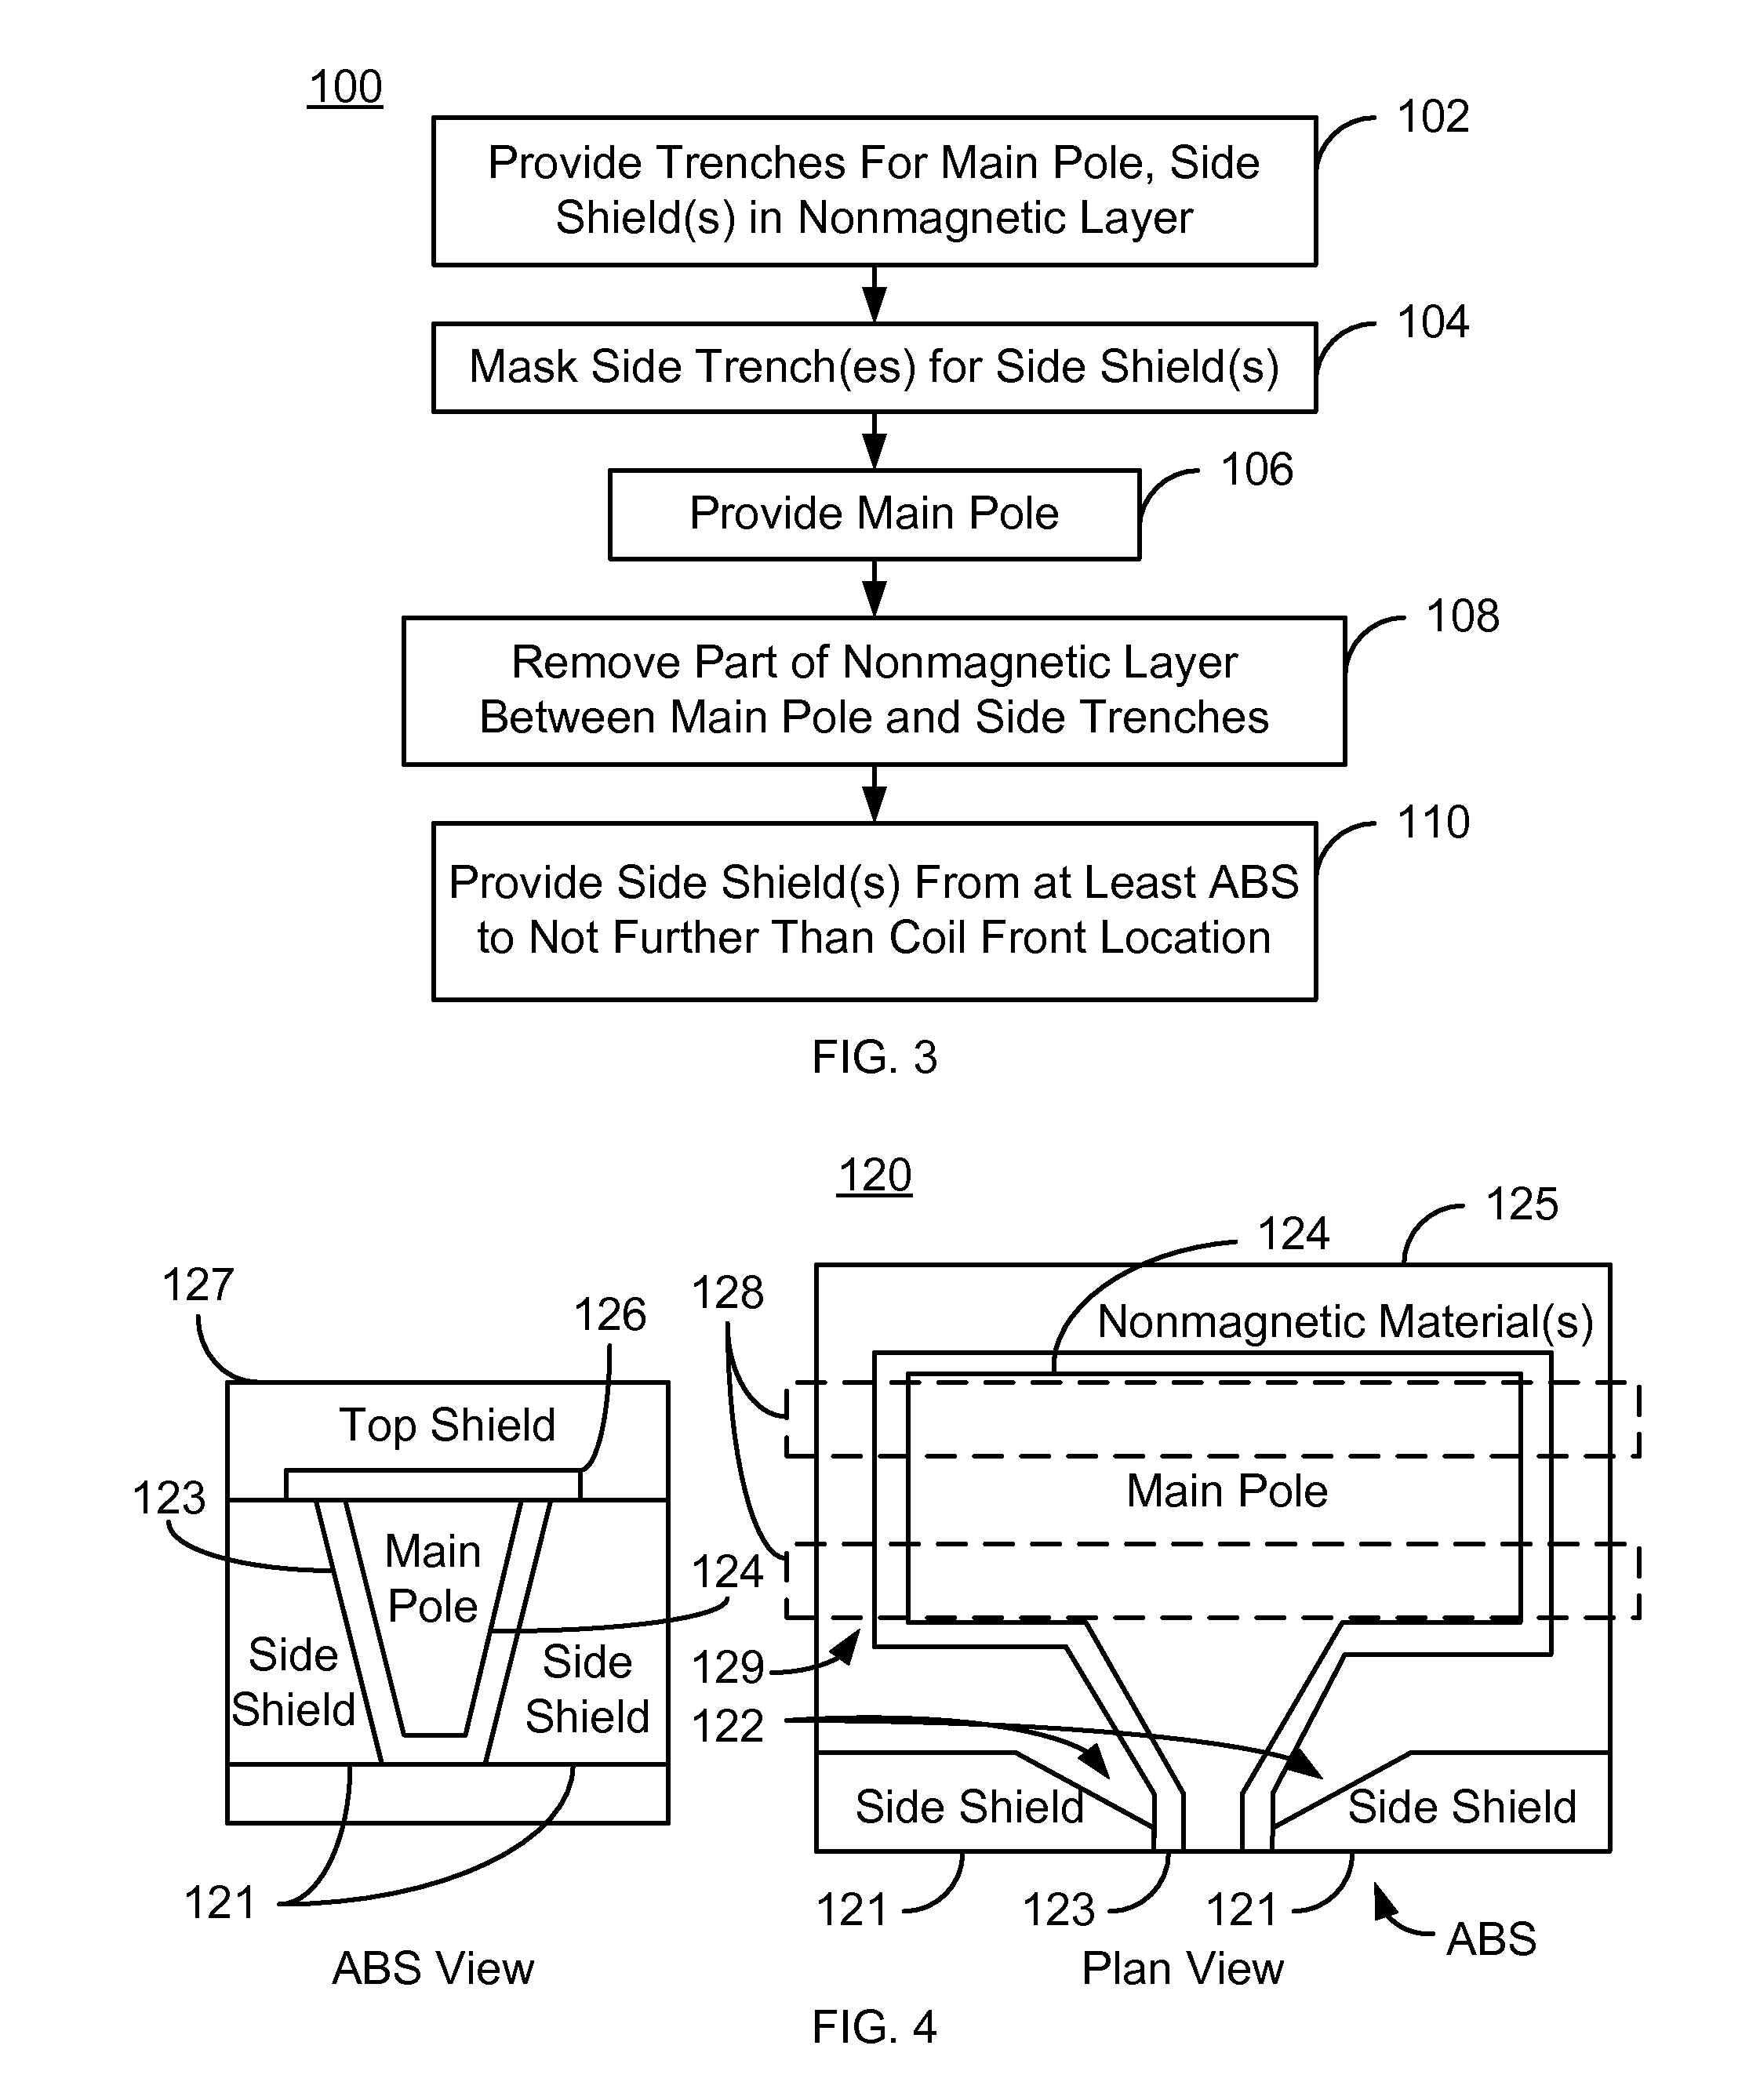 Method for fabricating a magnetic recording transducer having side shields